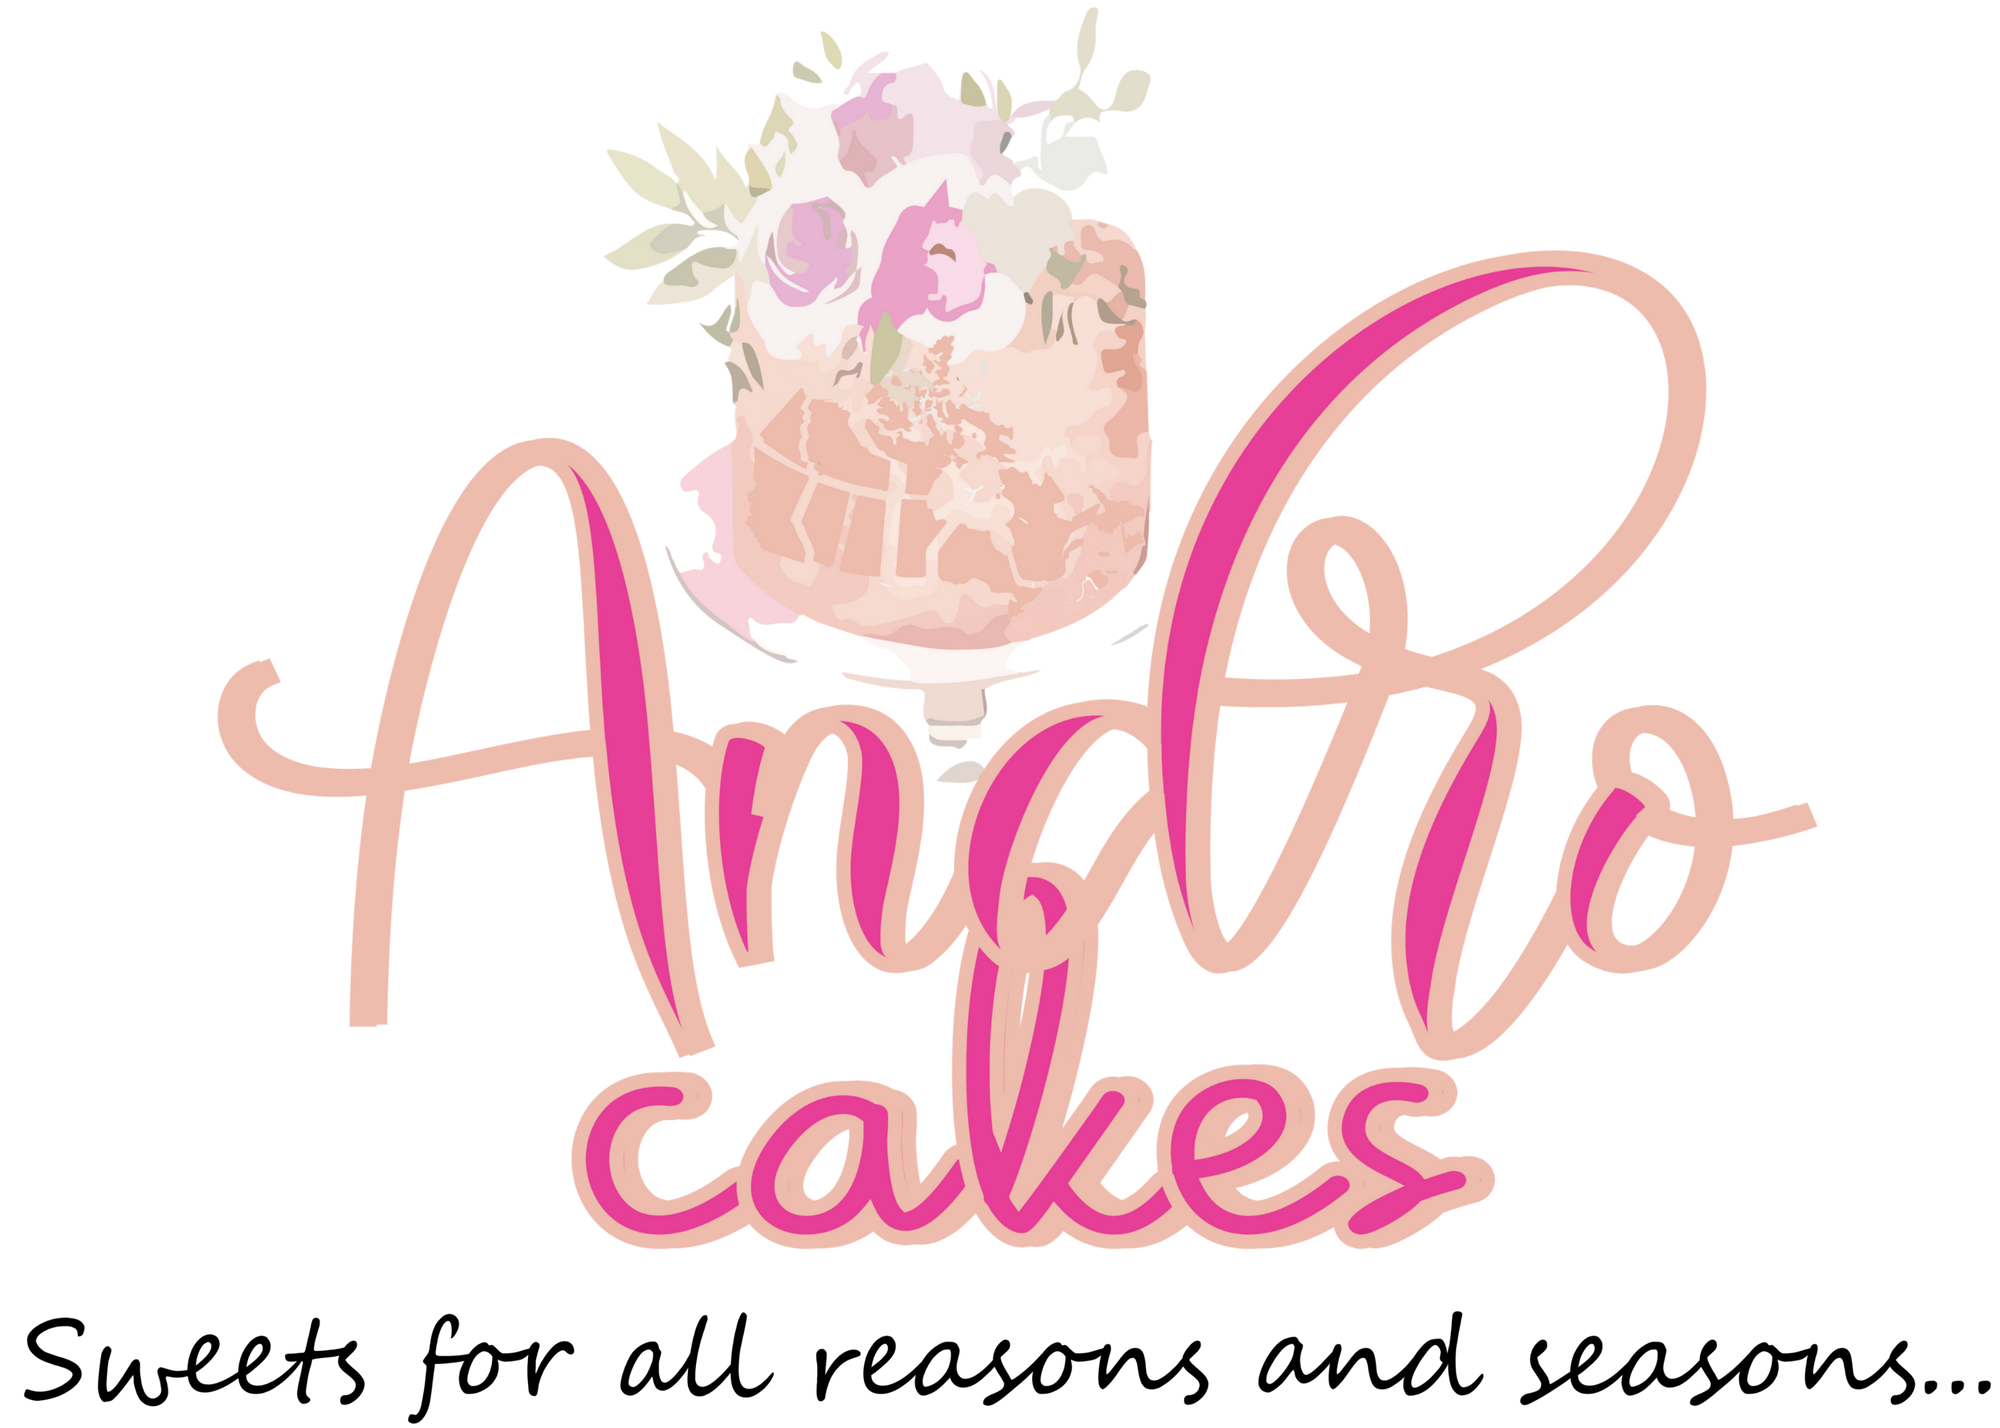 Andro Cakes